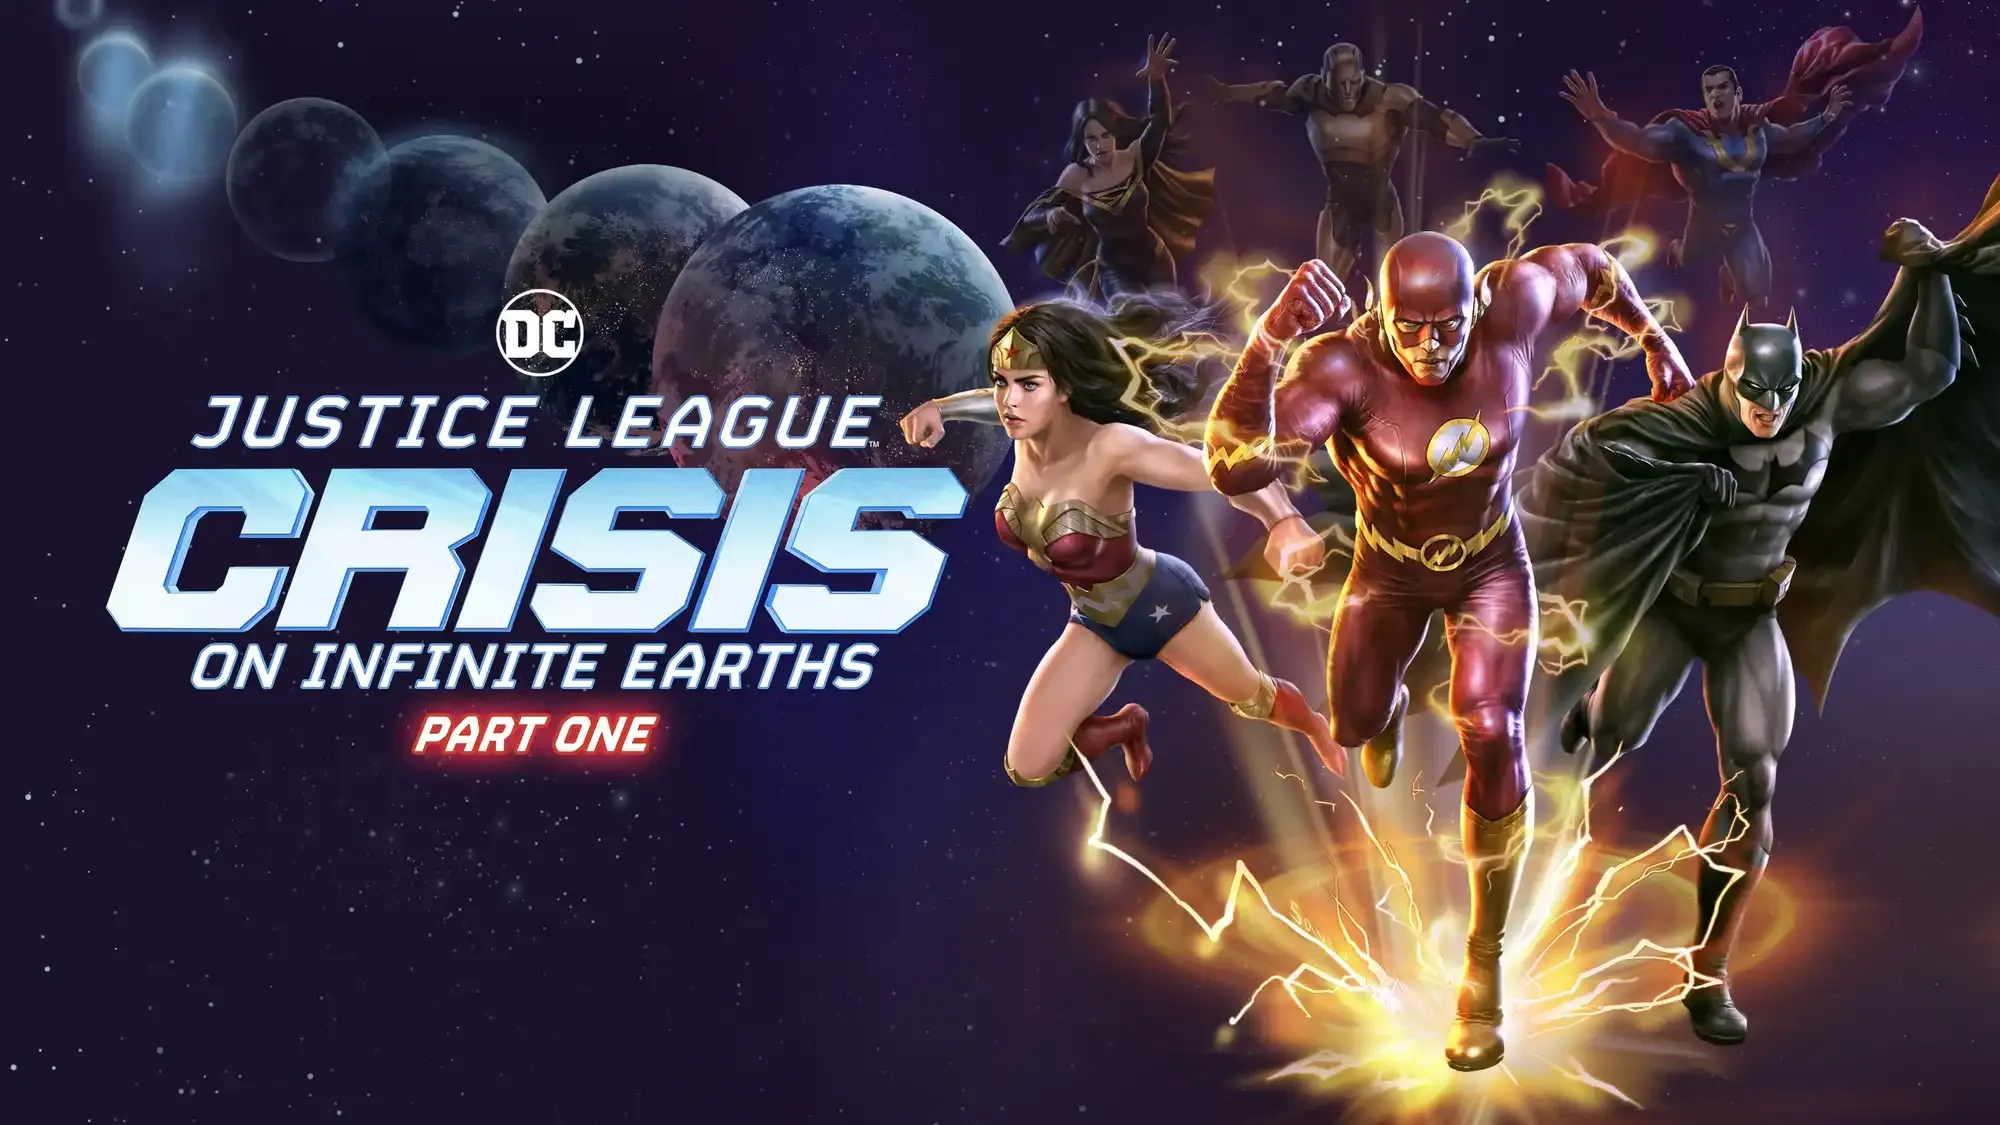 Justice League: Crisis on Infinite Earths Part One movie review